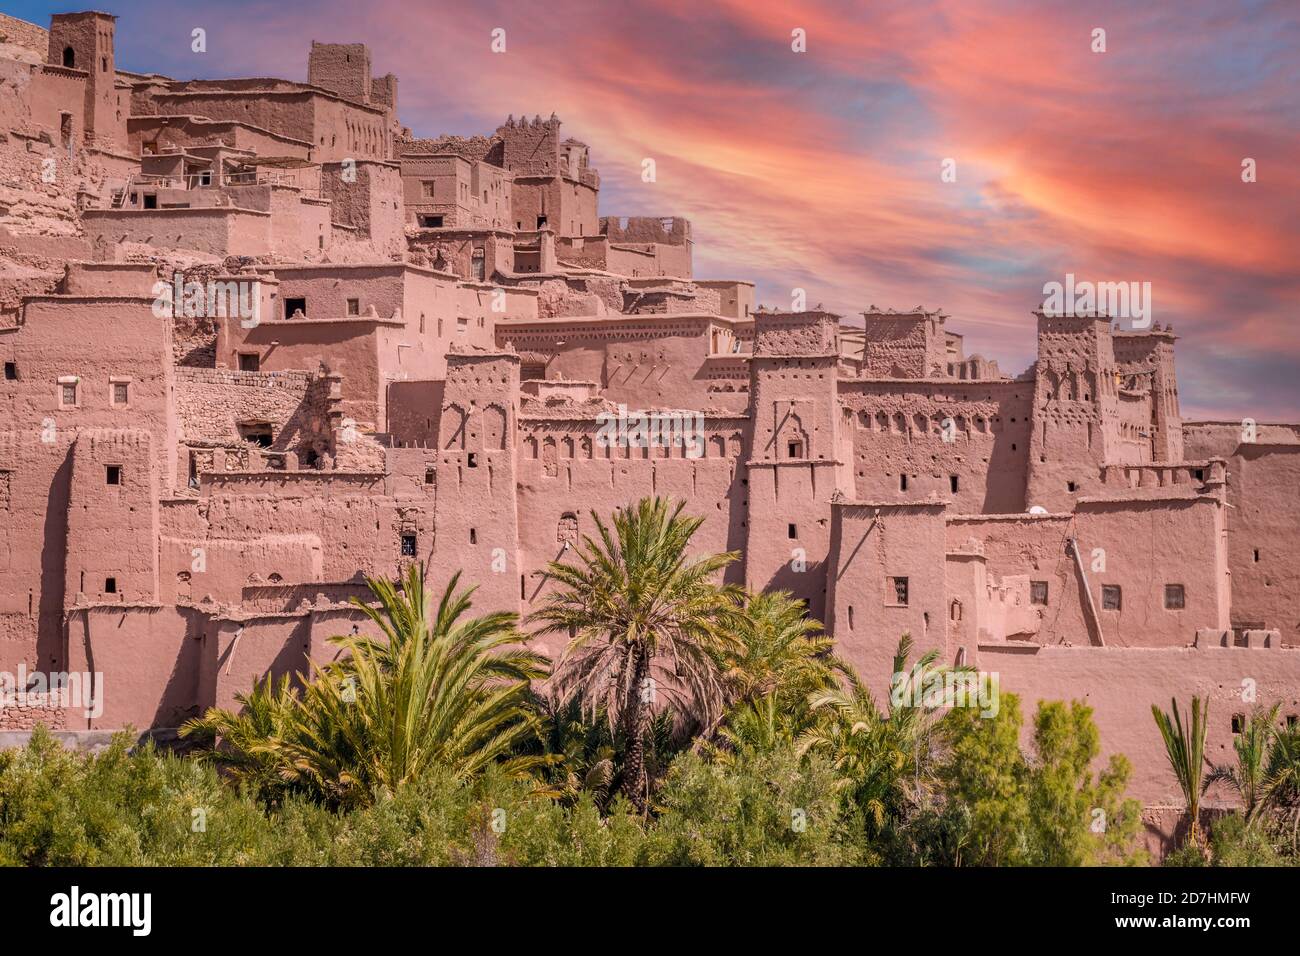 Sunset over fortified village and clay houses, Ait Benhaddou, Morocco Stock Photo